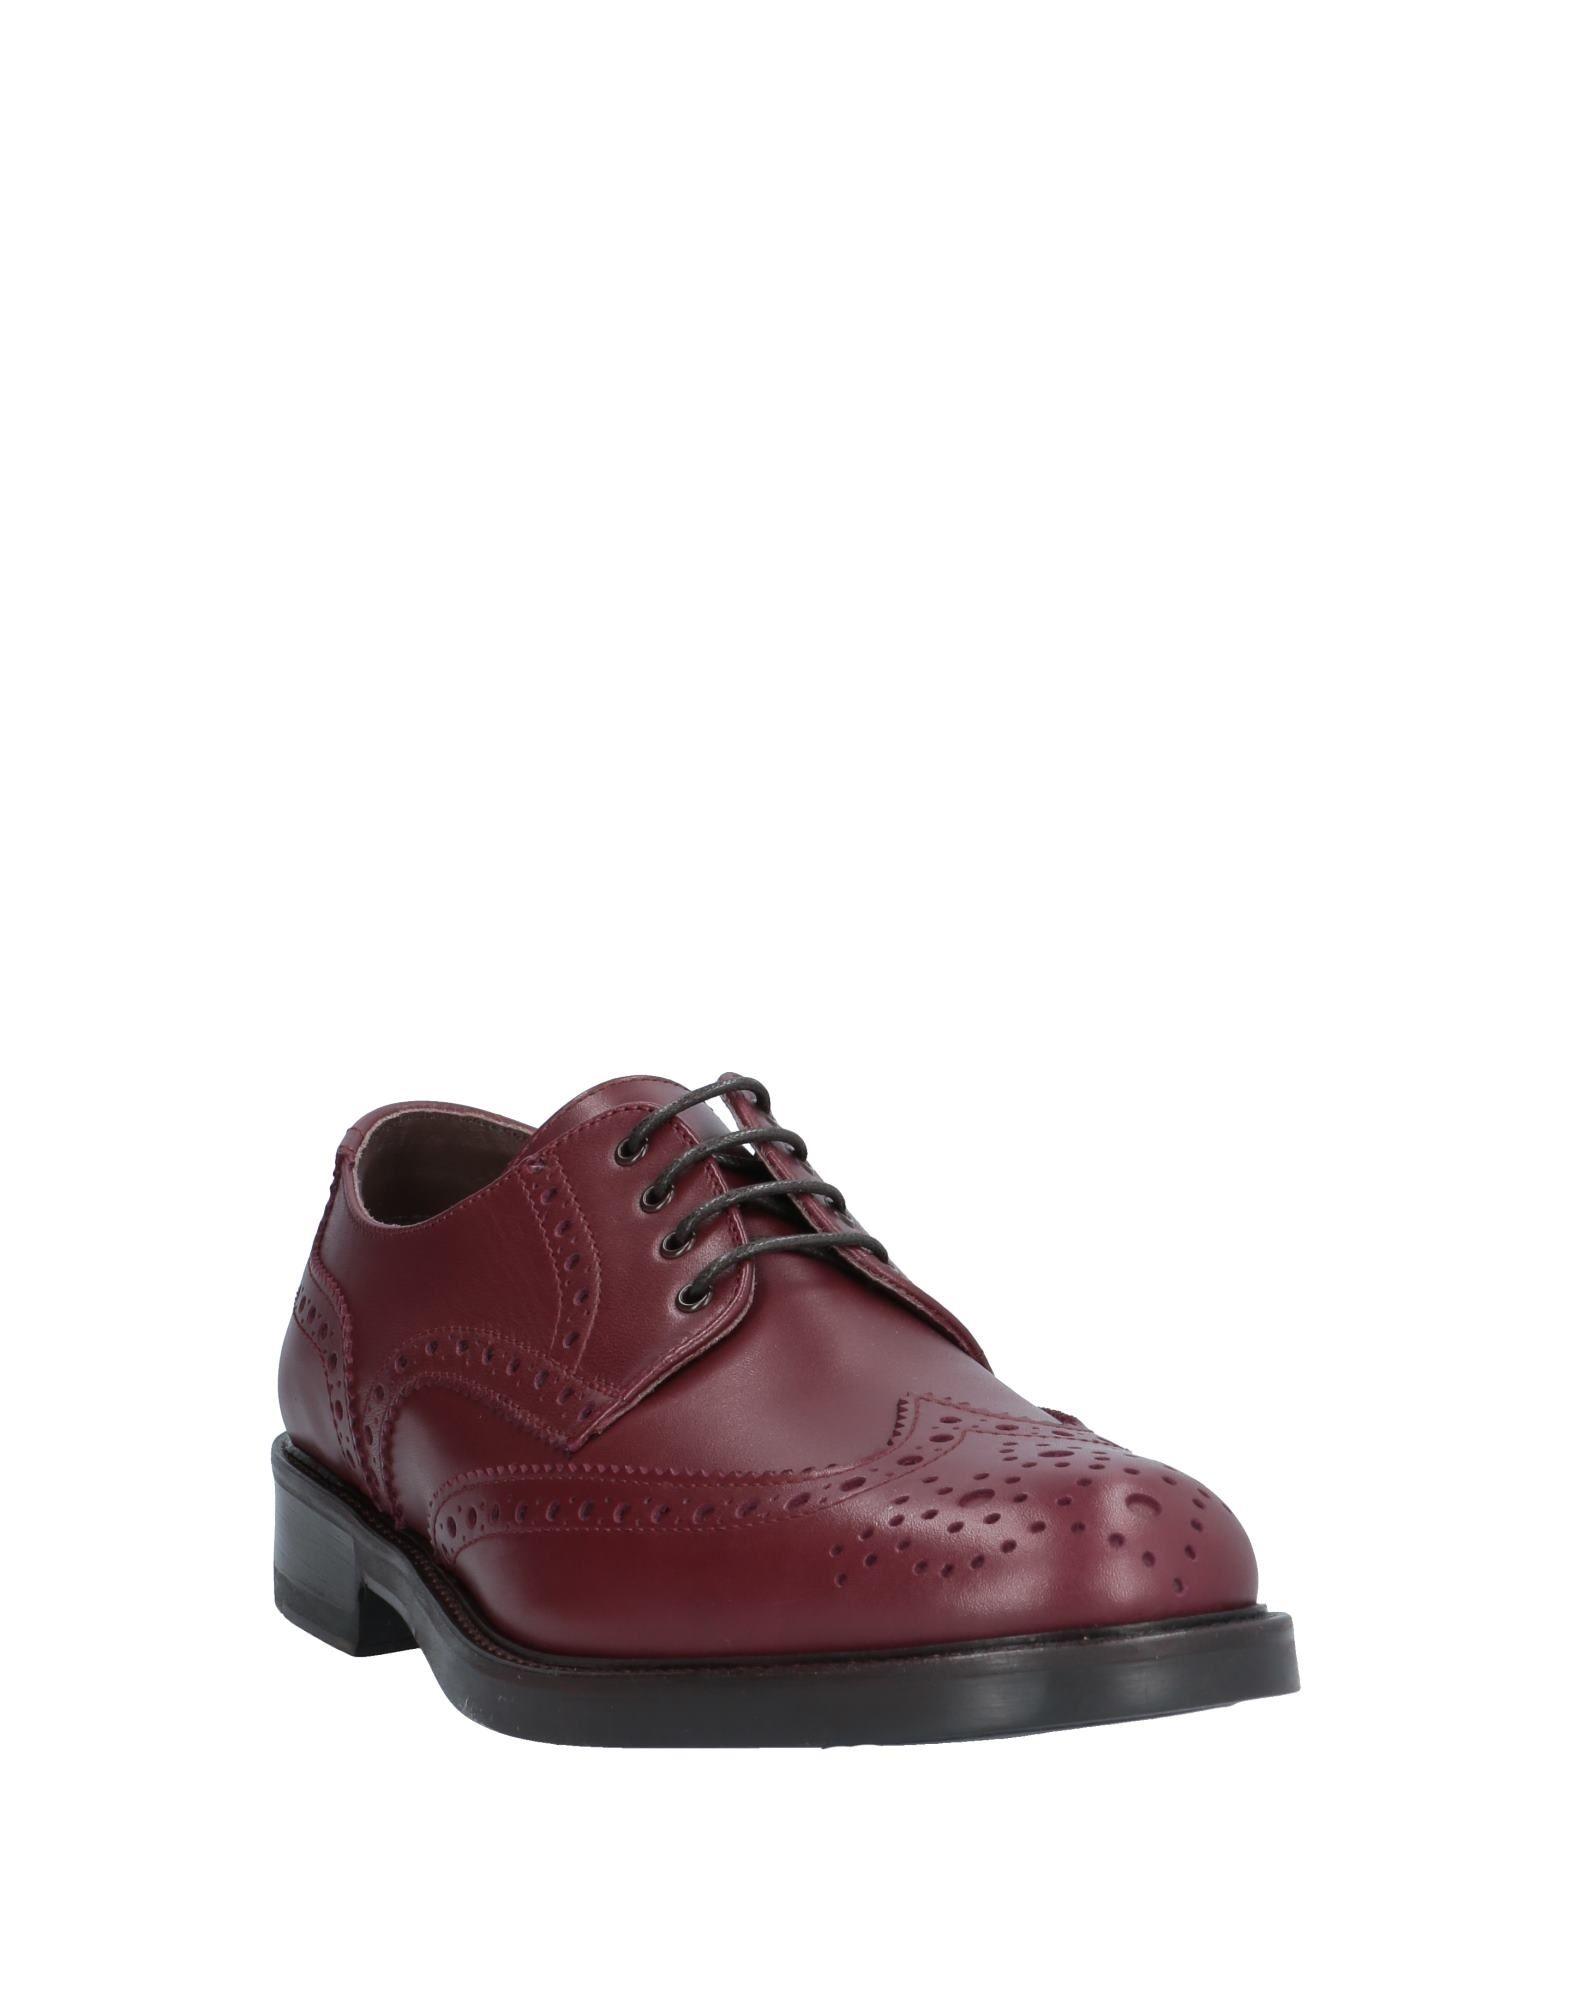 Boemos Leather Lace-up Shoe in Maroon (Purple) for Men - Lyst